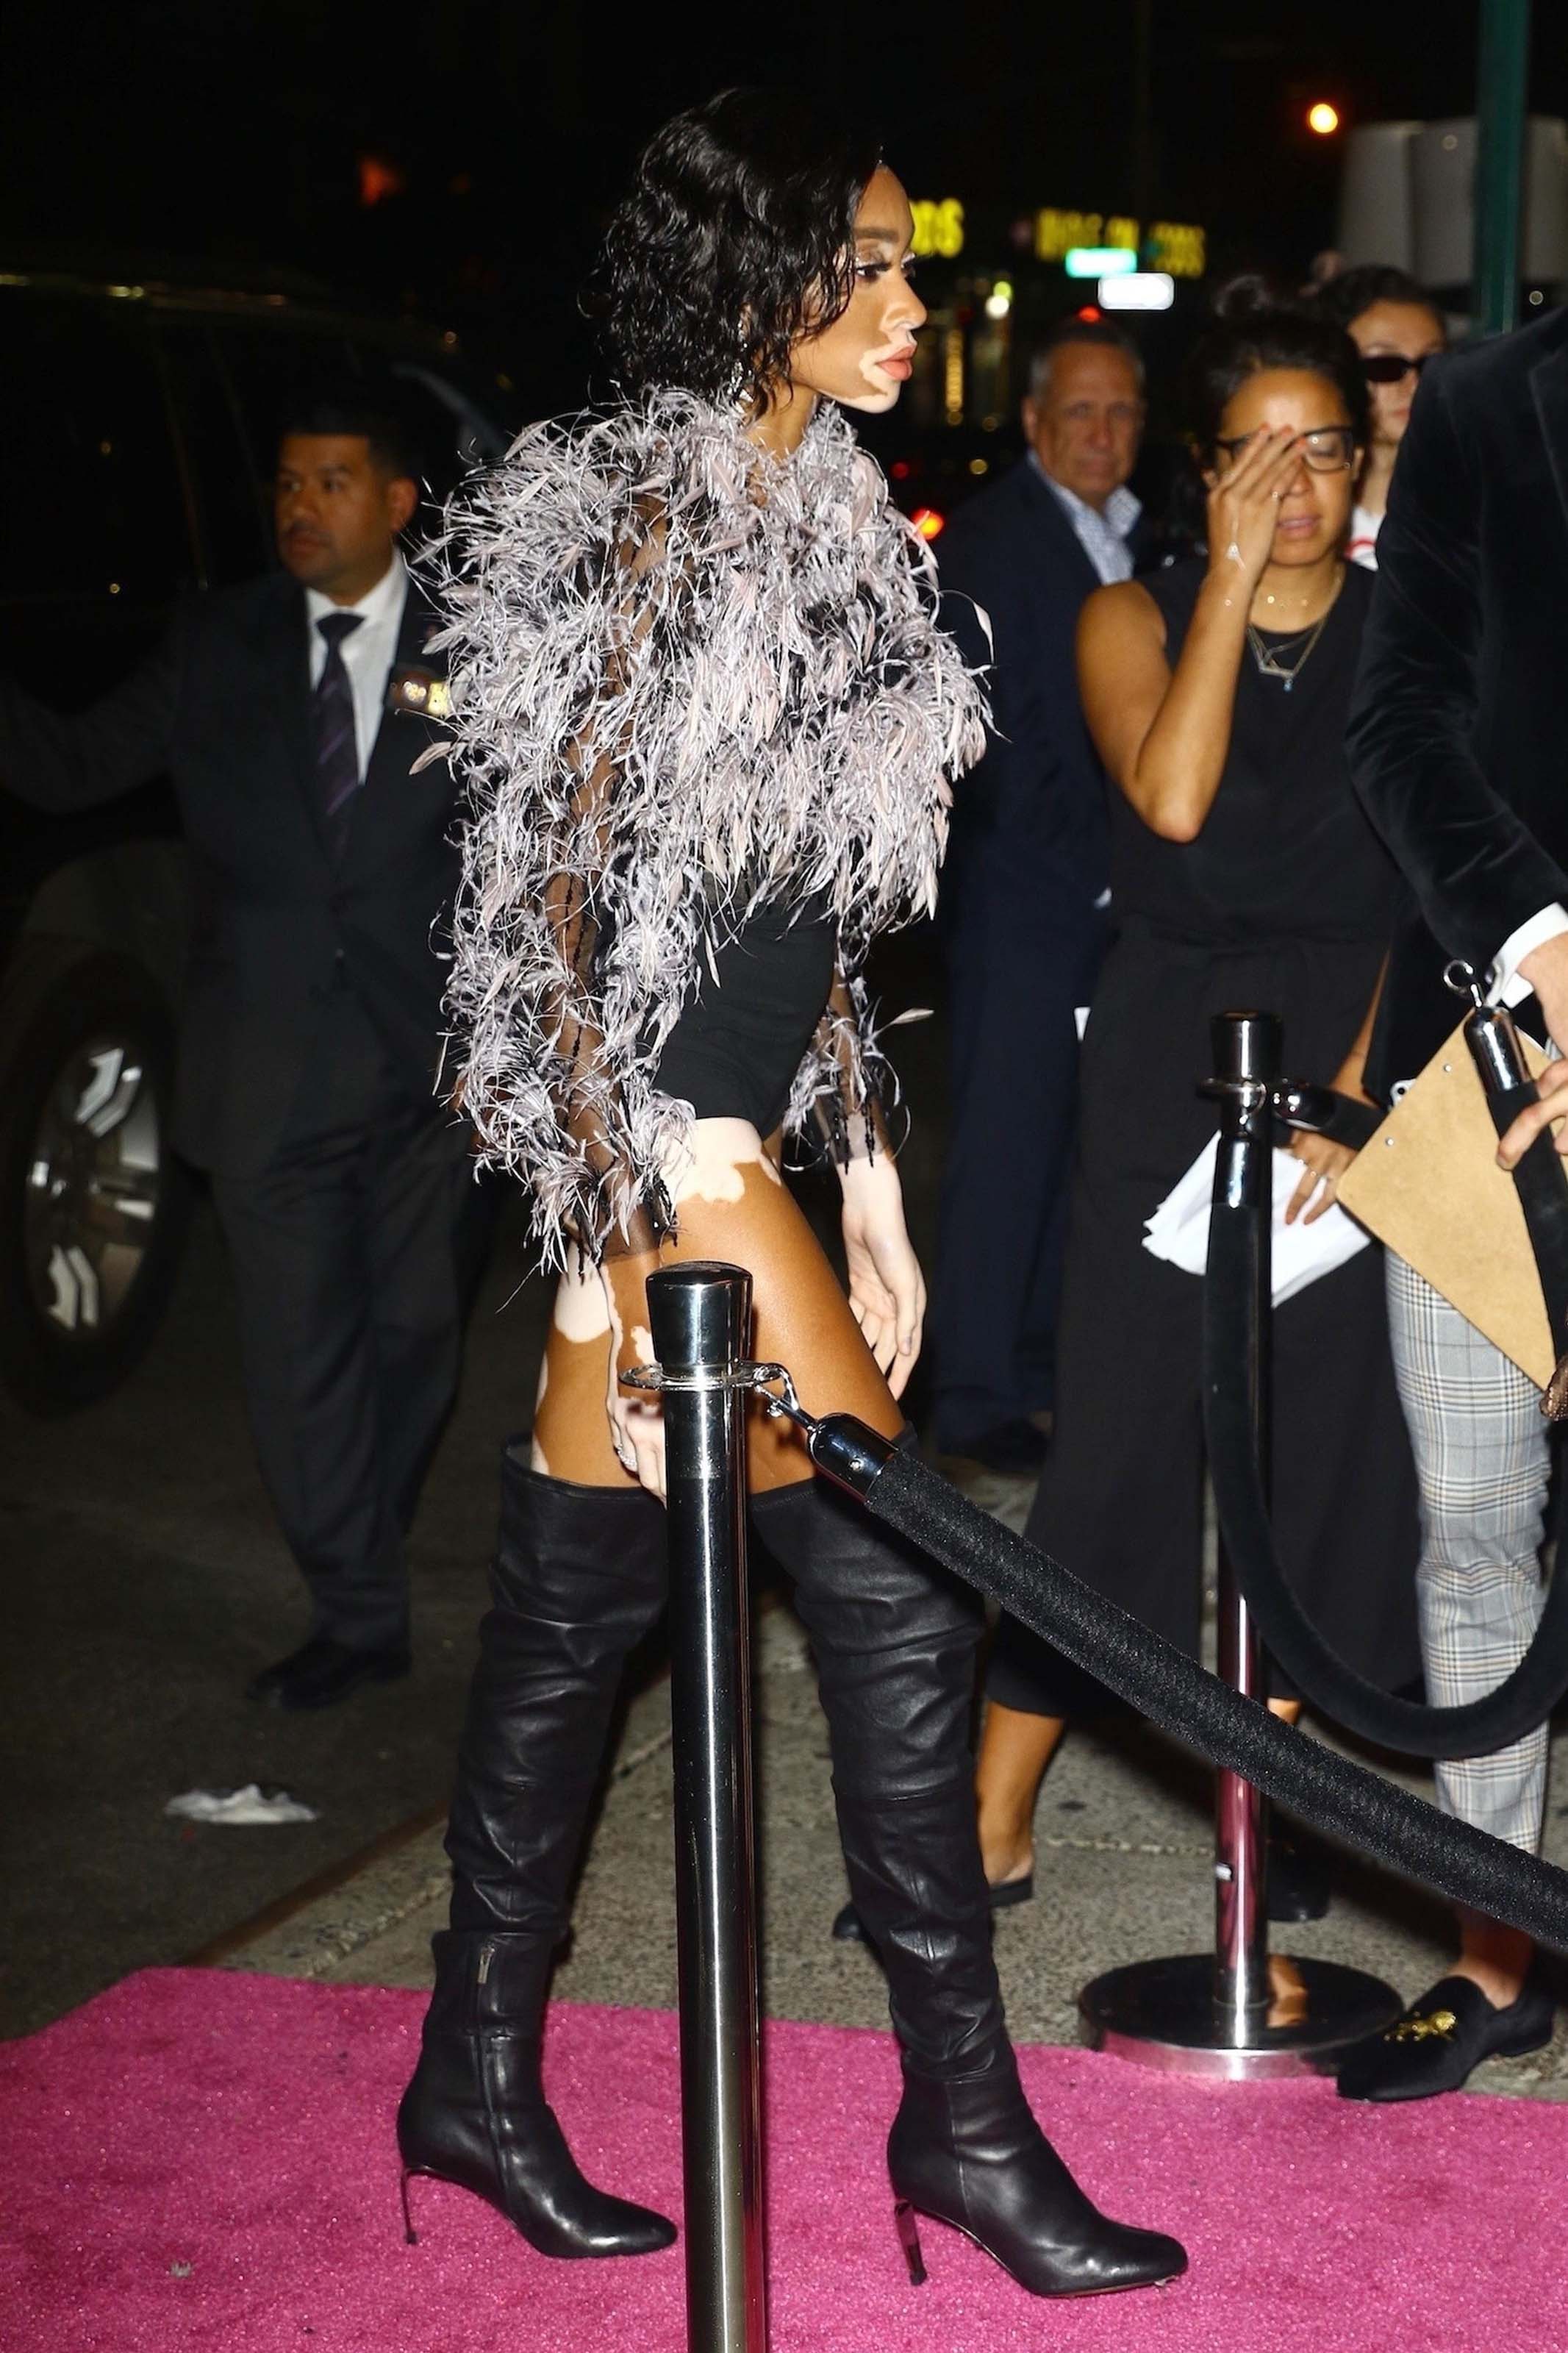 Winnie Harlow arriving at JLo’s VMA Afterparty